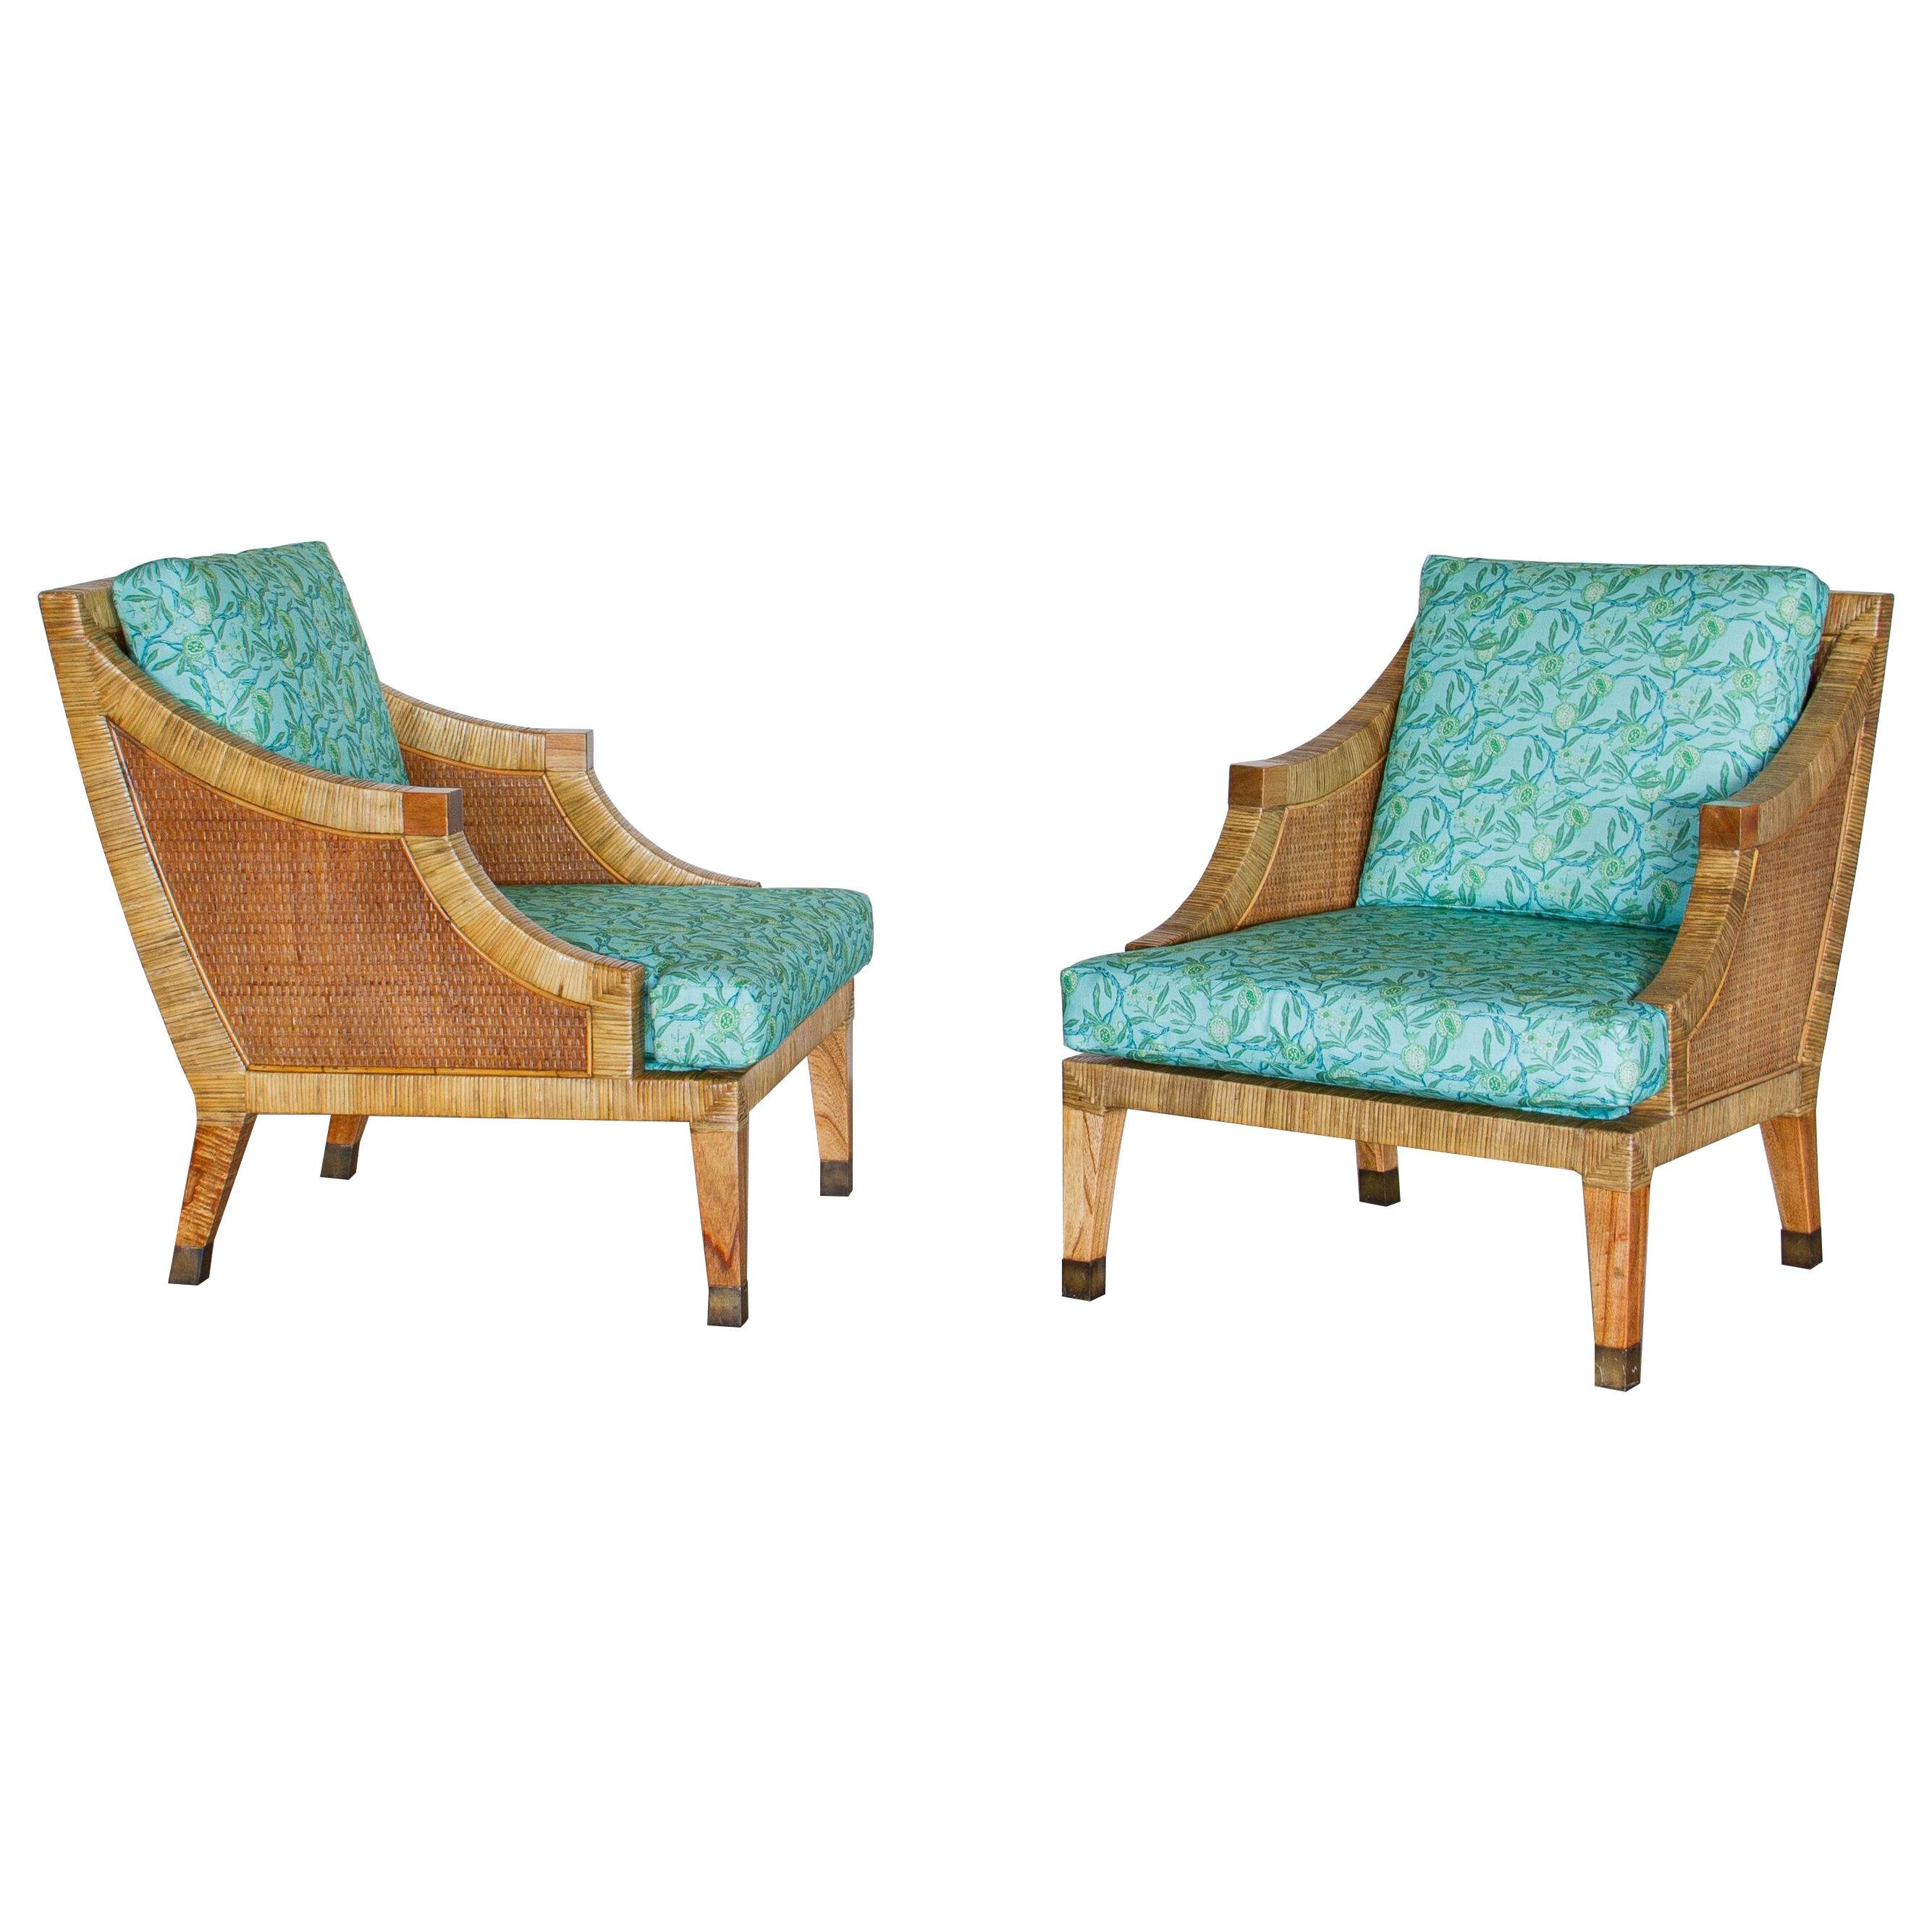 A Pair of Rattan Framed Armchairs, 1970s